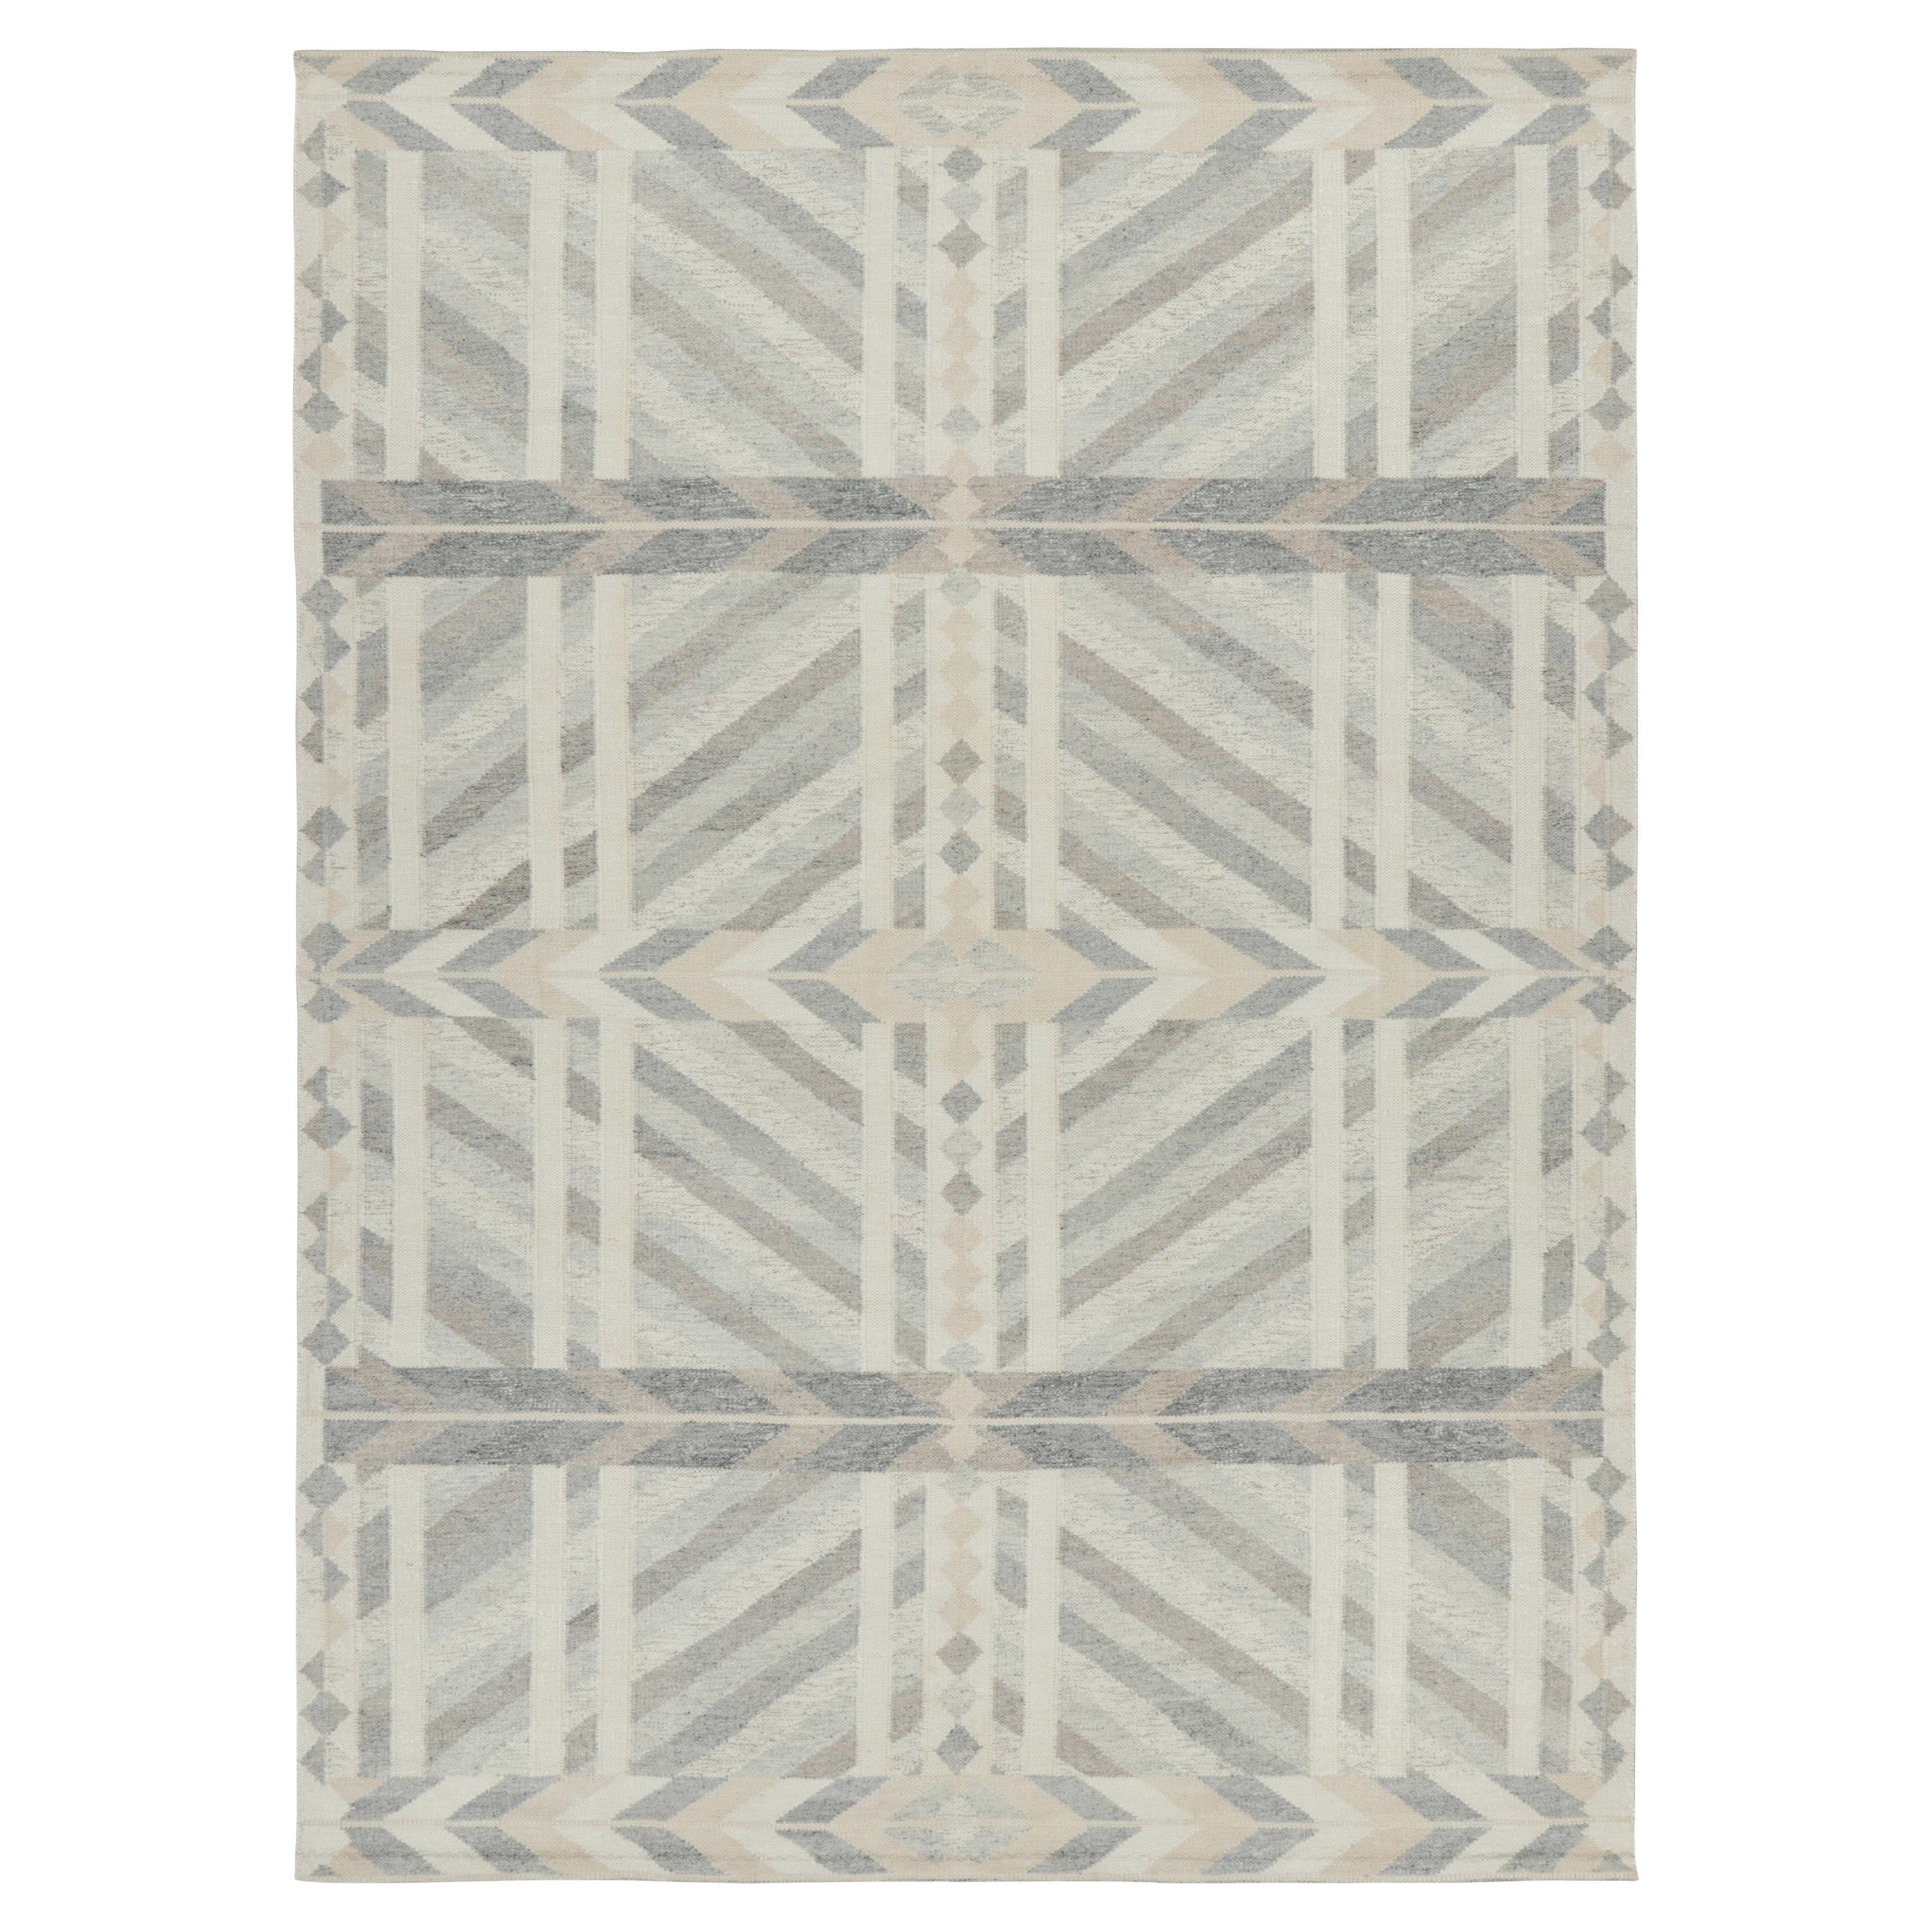 Rug & Kilim’s Scandinavian Style Rug in Gray Beige and White Geometric Patterns For Sale